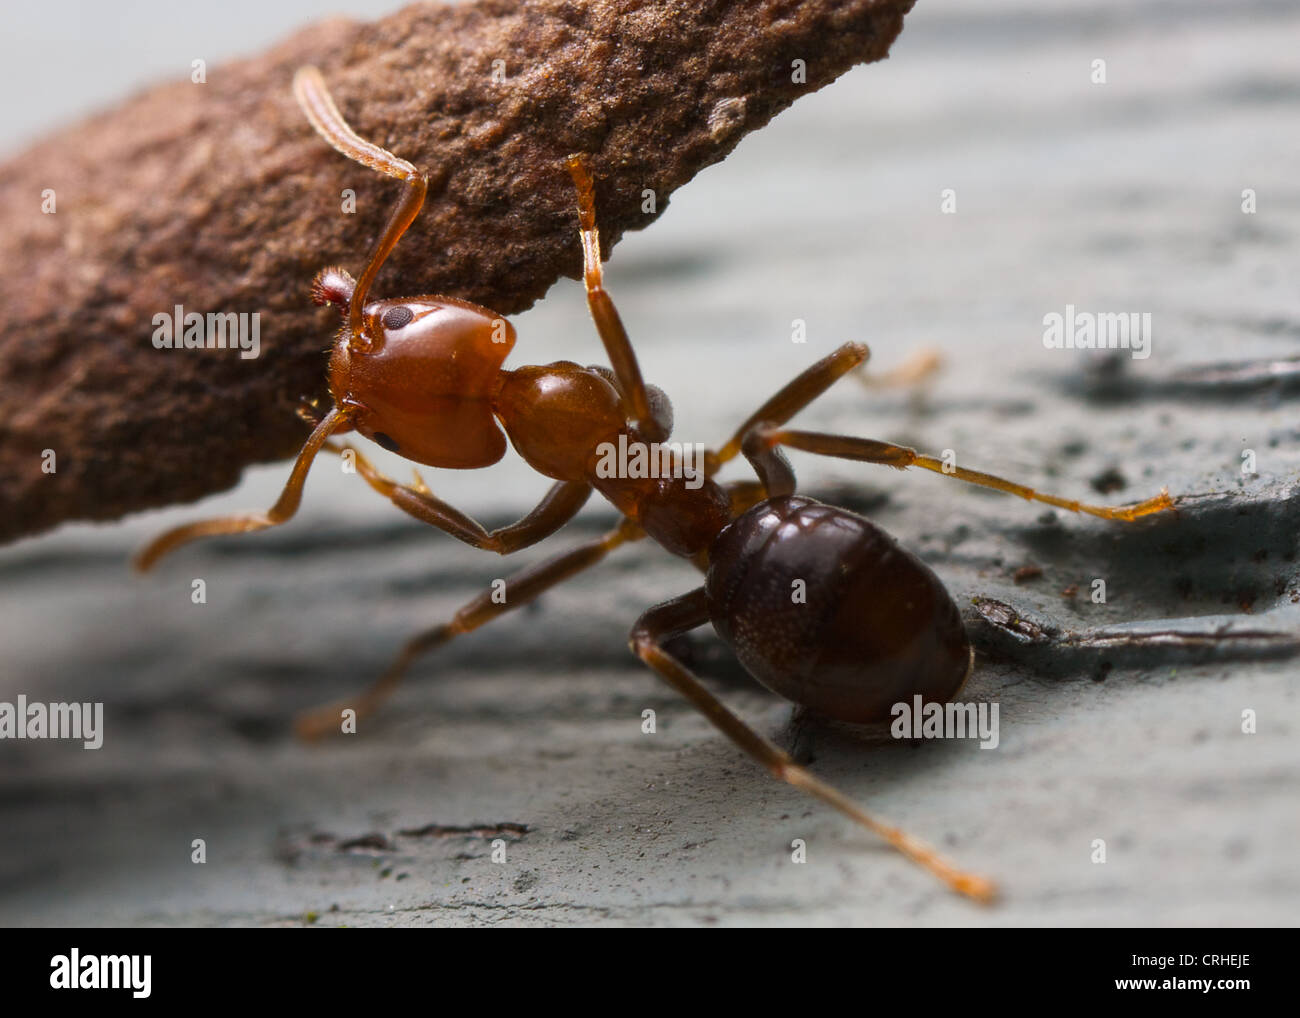 strong ant lifting a wood fibre Stock Photo - Alamy